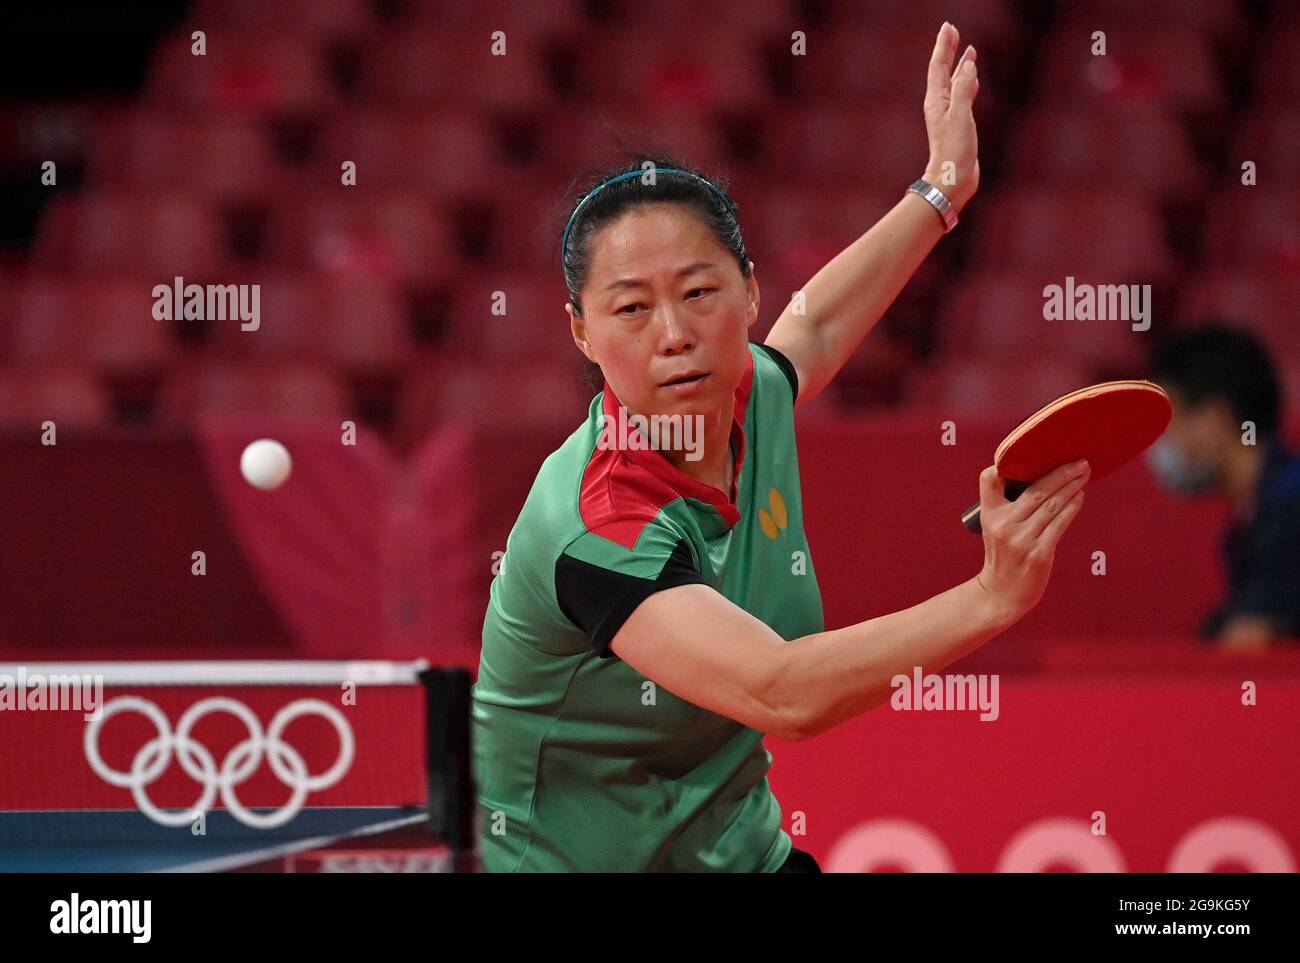 Tokyo, Japan. 27th July, 2021. Fu Yu of Portugal returns the ball during the women's singles third round match against Ito Mima of Japan at Tokyo 2020 Olympic Games in Tokyo, Japan, July 27, 2021. Credit: Guo Chen/Xinhua/Alamy Live News Stock Photo